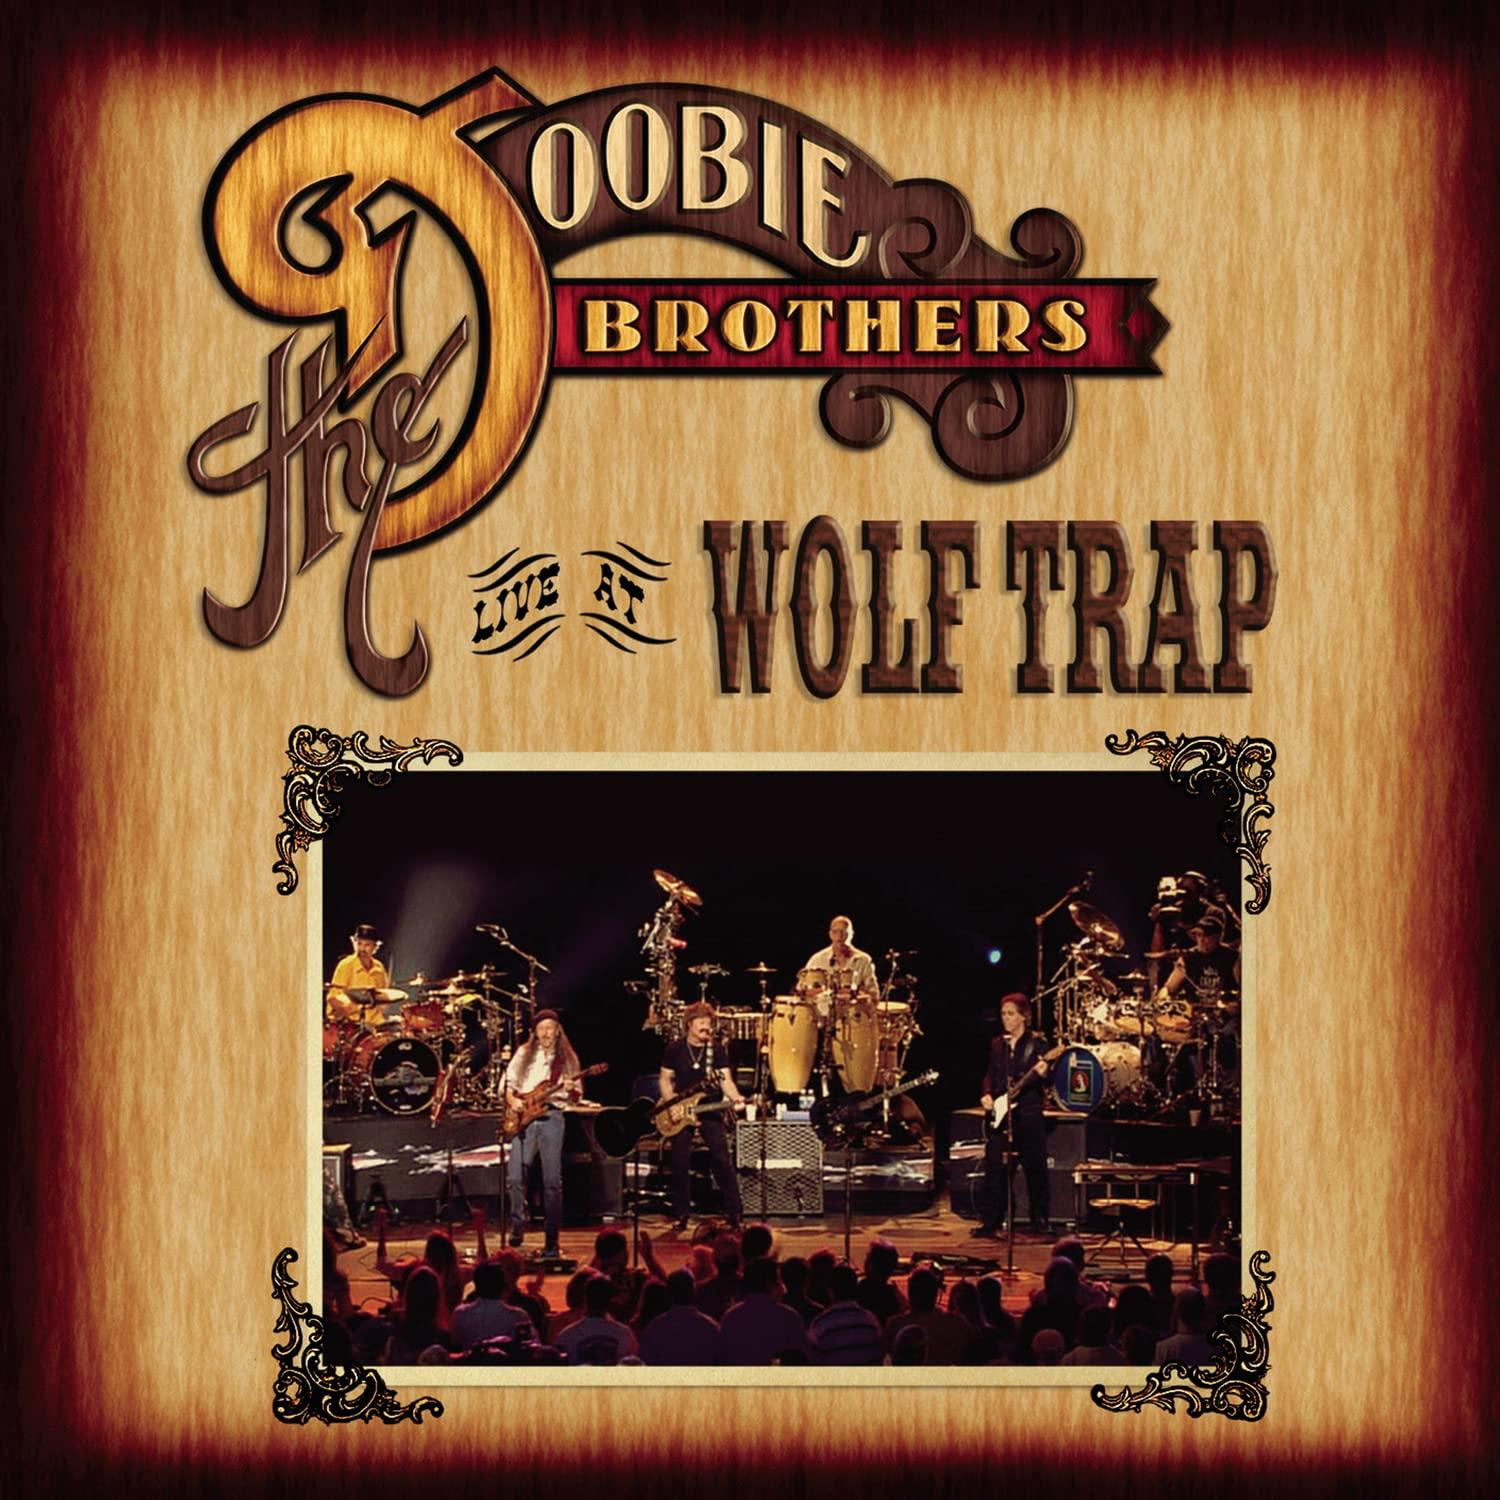 Brothers - Wolf - Live Video) Trap At + DVD Doobie (CD The